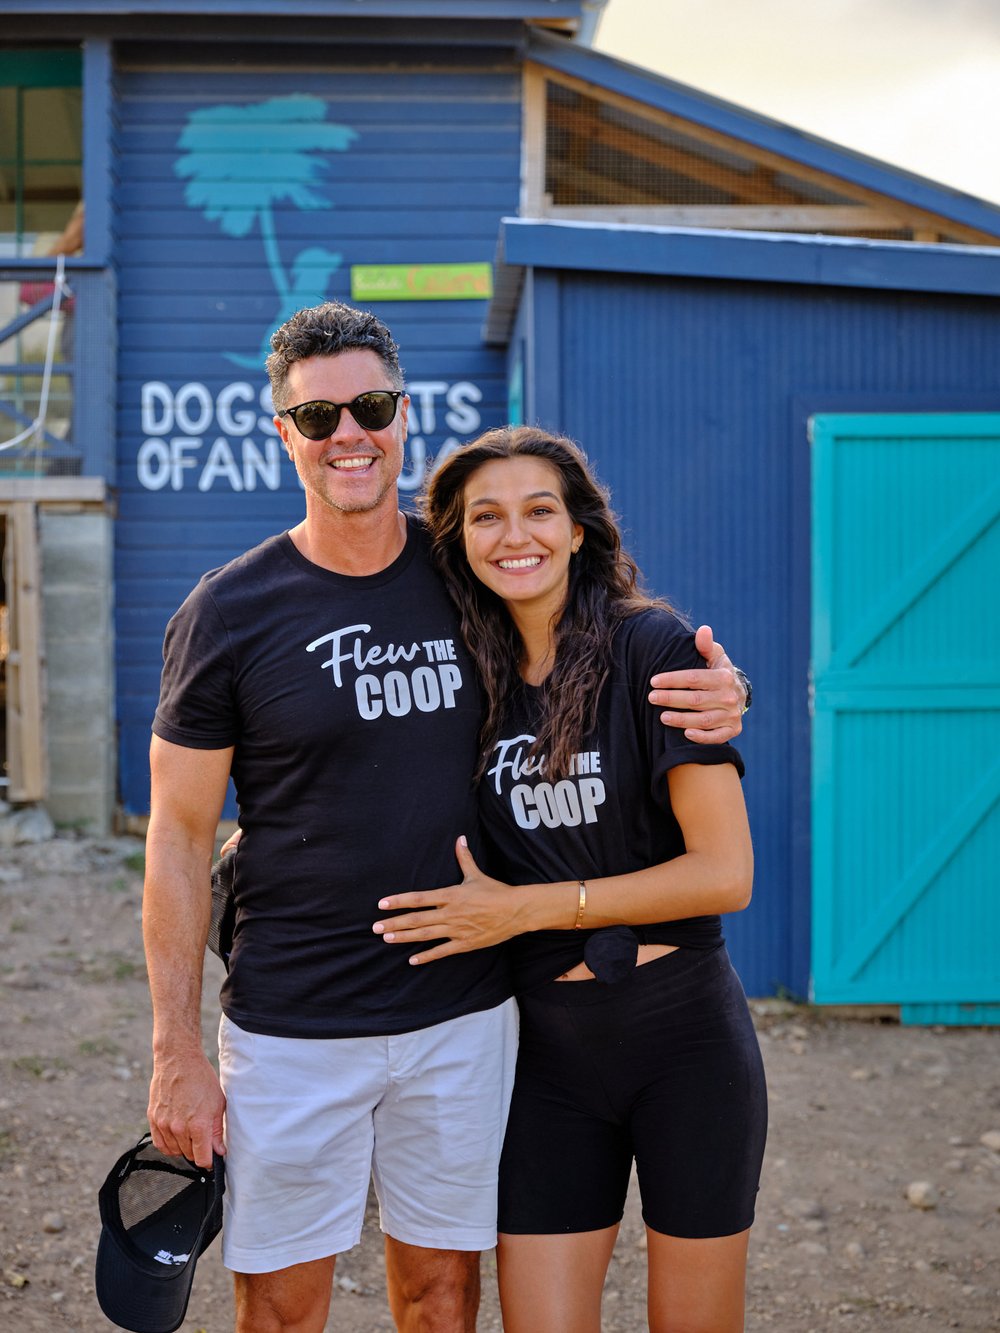 Flew-The-Coop-Founders-Christopher-N.-Harding-Danielle-Sandhu-at-Dogs-Cats-of-Antigua-Wellness-Sanctuary.jpg